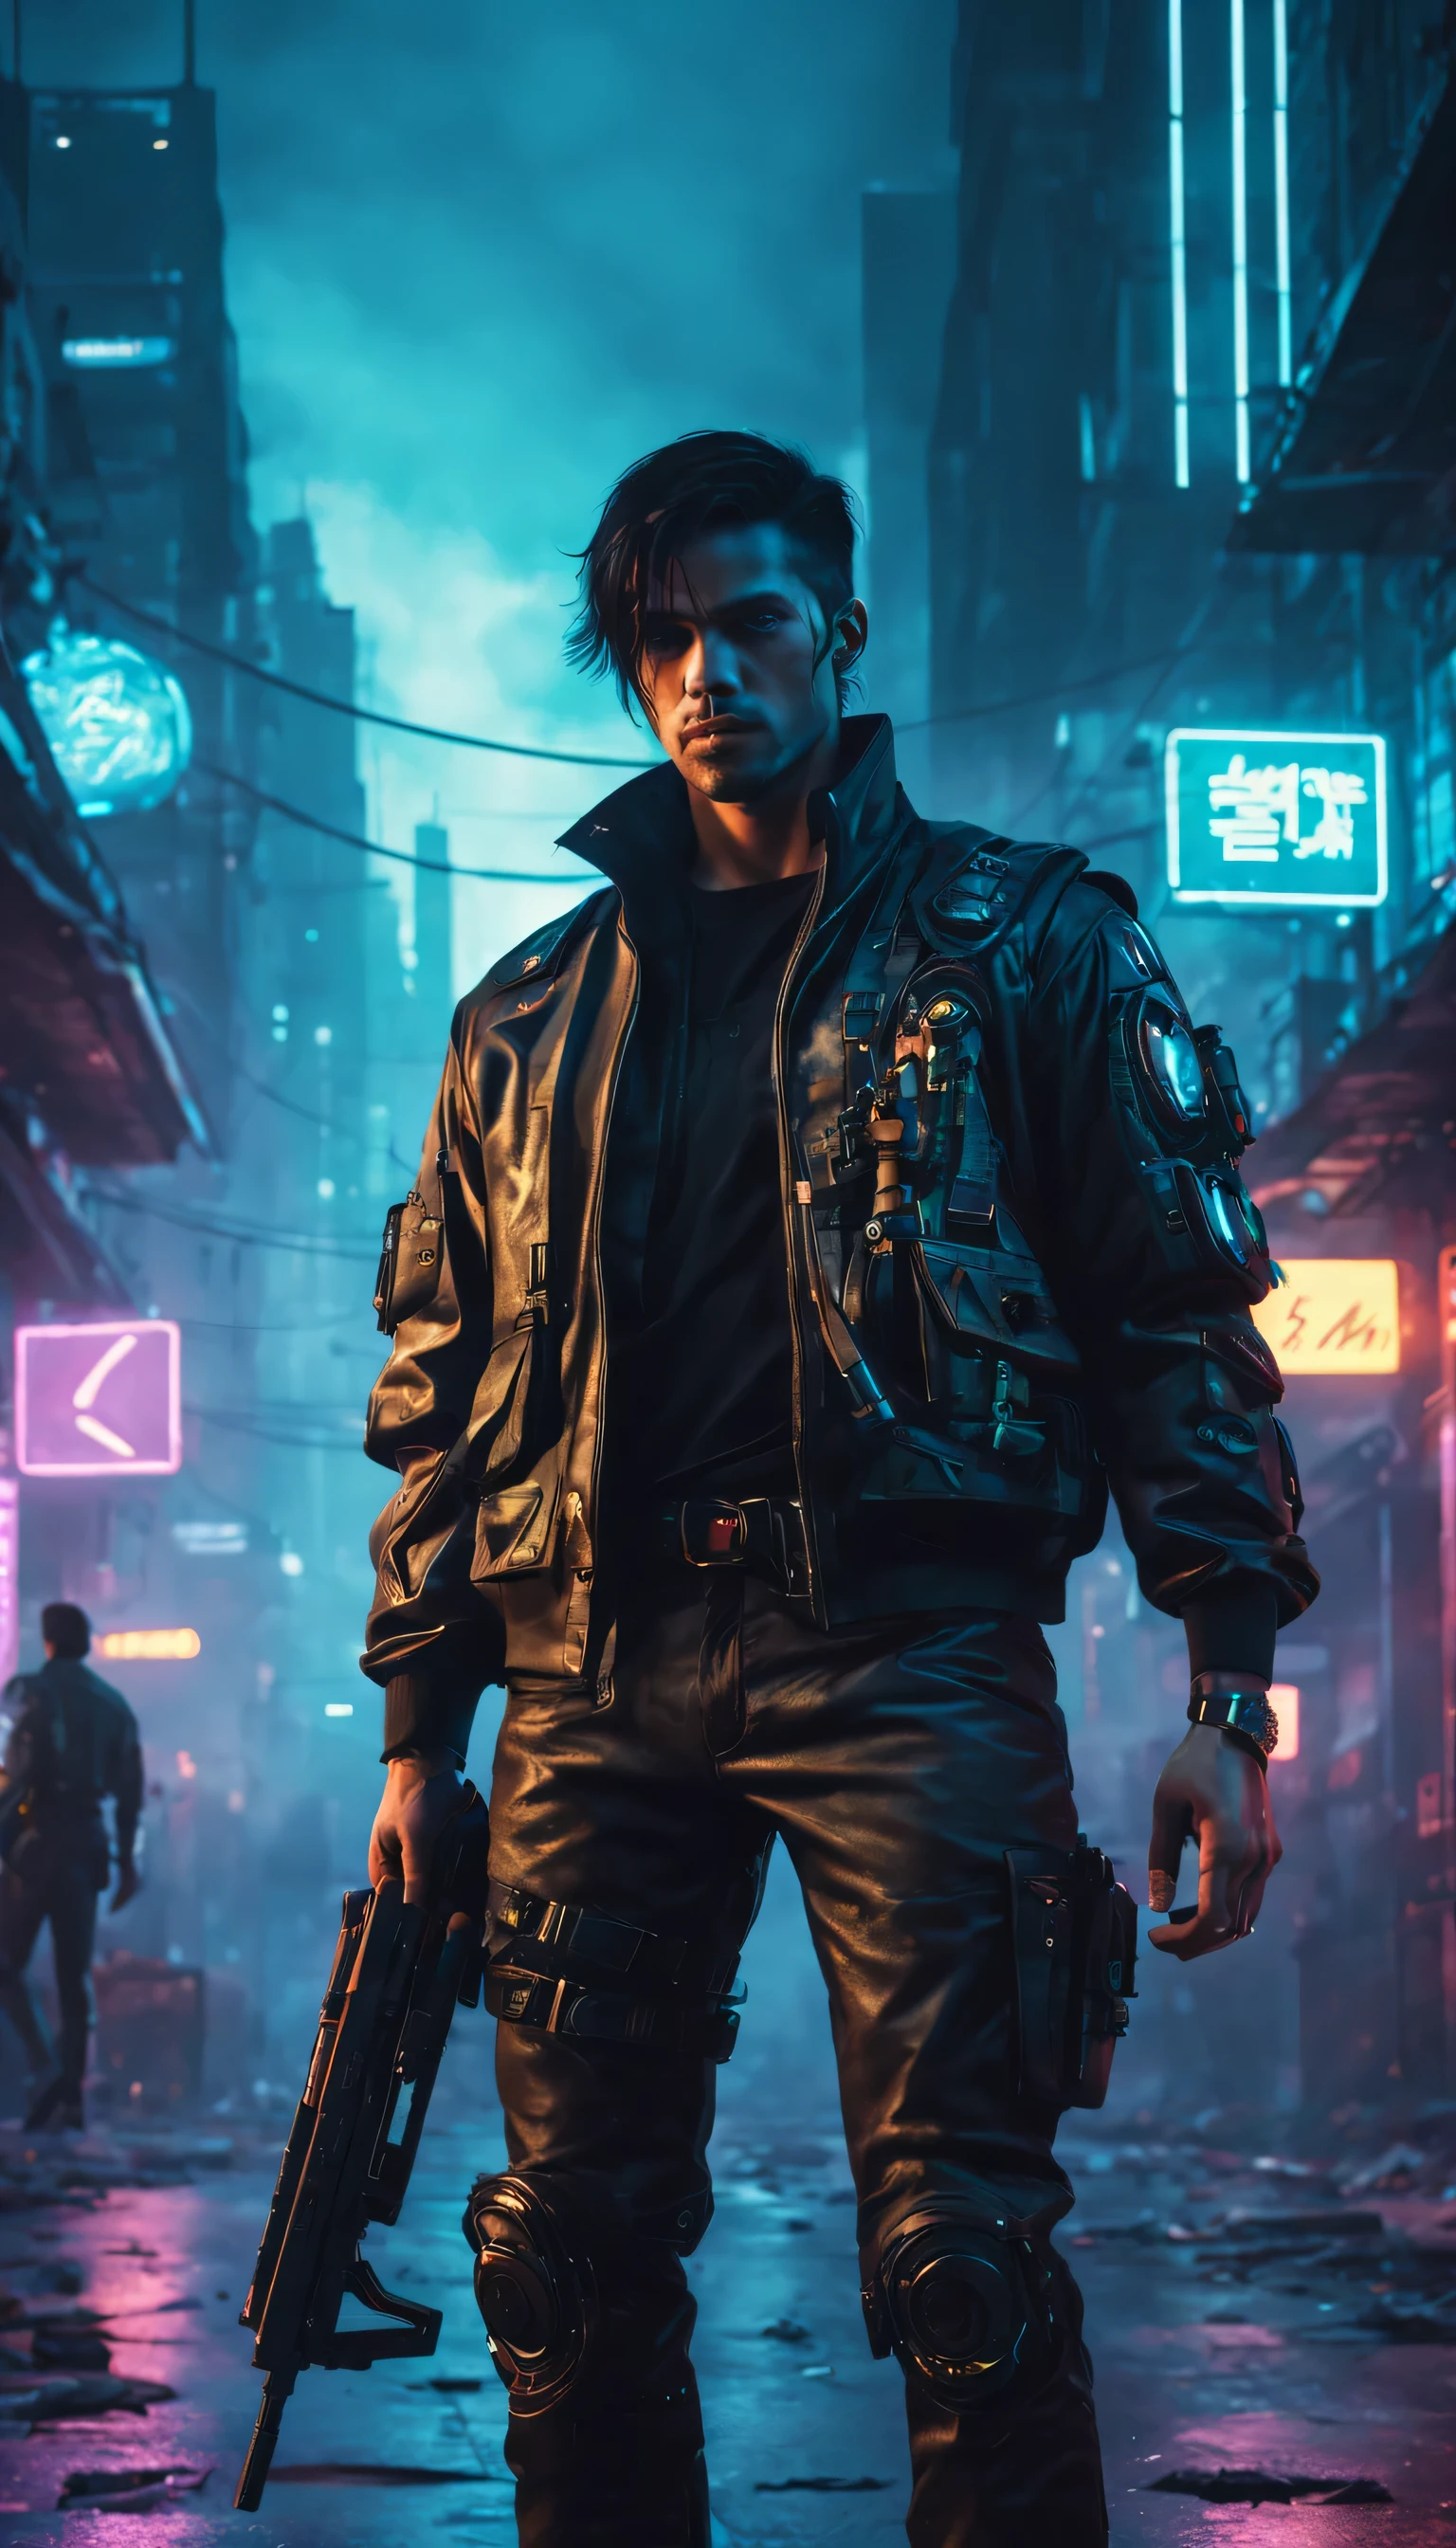 (Best Quality, 4k, 8k, High resolution, Masterpiece: 1.2), ultra detailed, realist, ((man)), black fur, cyberpunk clothing, carrying a futurist weapon in hand, Buildings in the background, neon lights, Cyberpunk City, industrial landscape, dystopian environment, futurist, Light signals, urban decay, dark alleys, dirty streets, wet, Holographic projections, high-tech devices, steampunk elements, night atmosphere, Spectacular lighting, smoke and fog effects, Mysterious atmosphere, integration of artificial intelligence, Sci-Fi Aesthetics, bright colors, Prosperous metropolis, walking robots, on the street